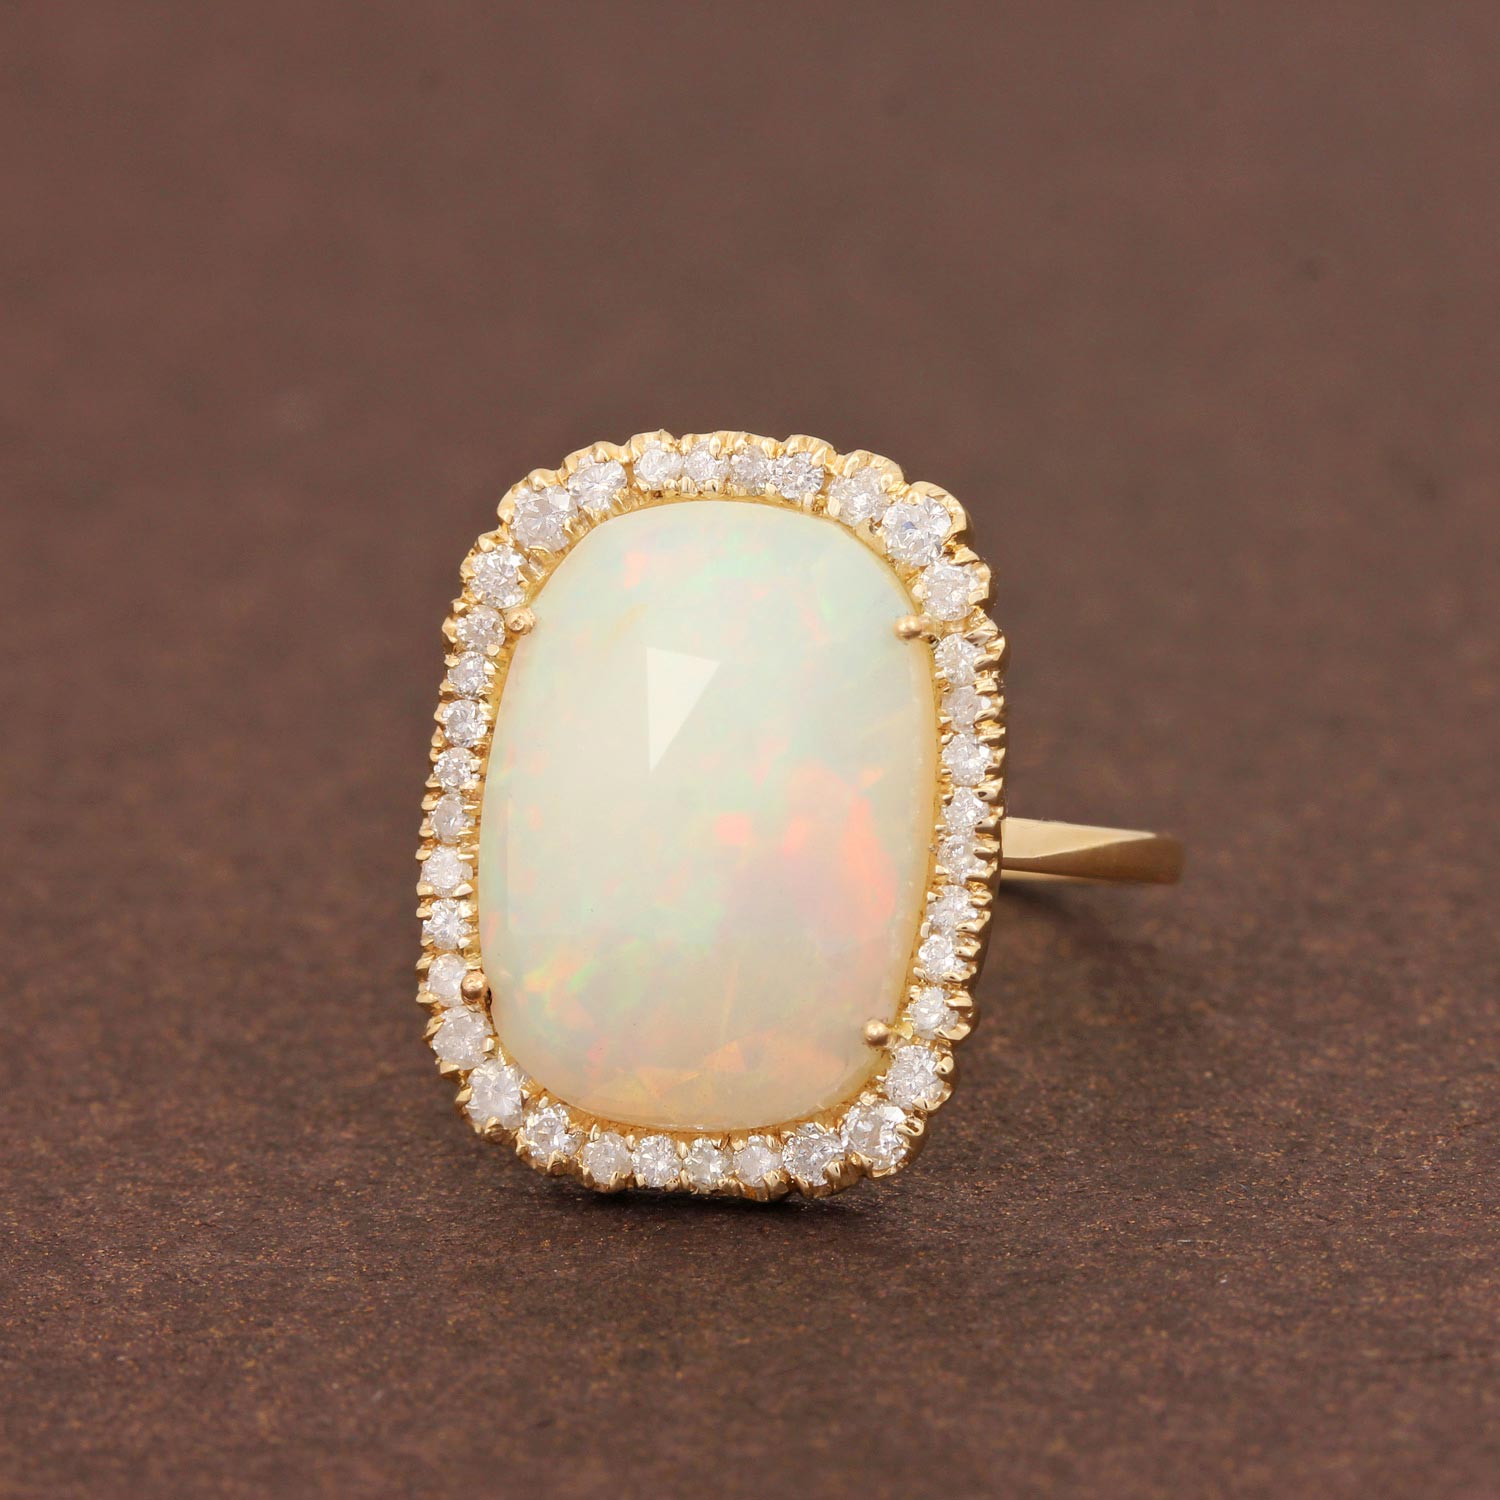 Opal Gemstone Pave Diamond Cocktail Ring 14K Solid Gold Fine Jewelry